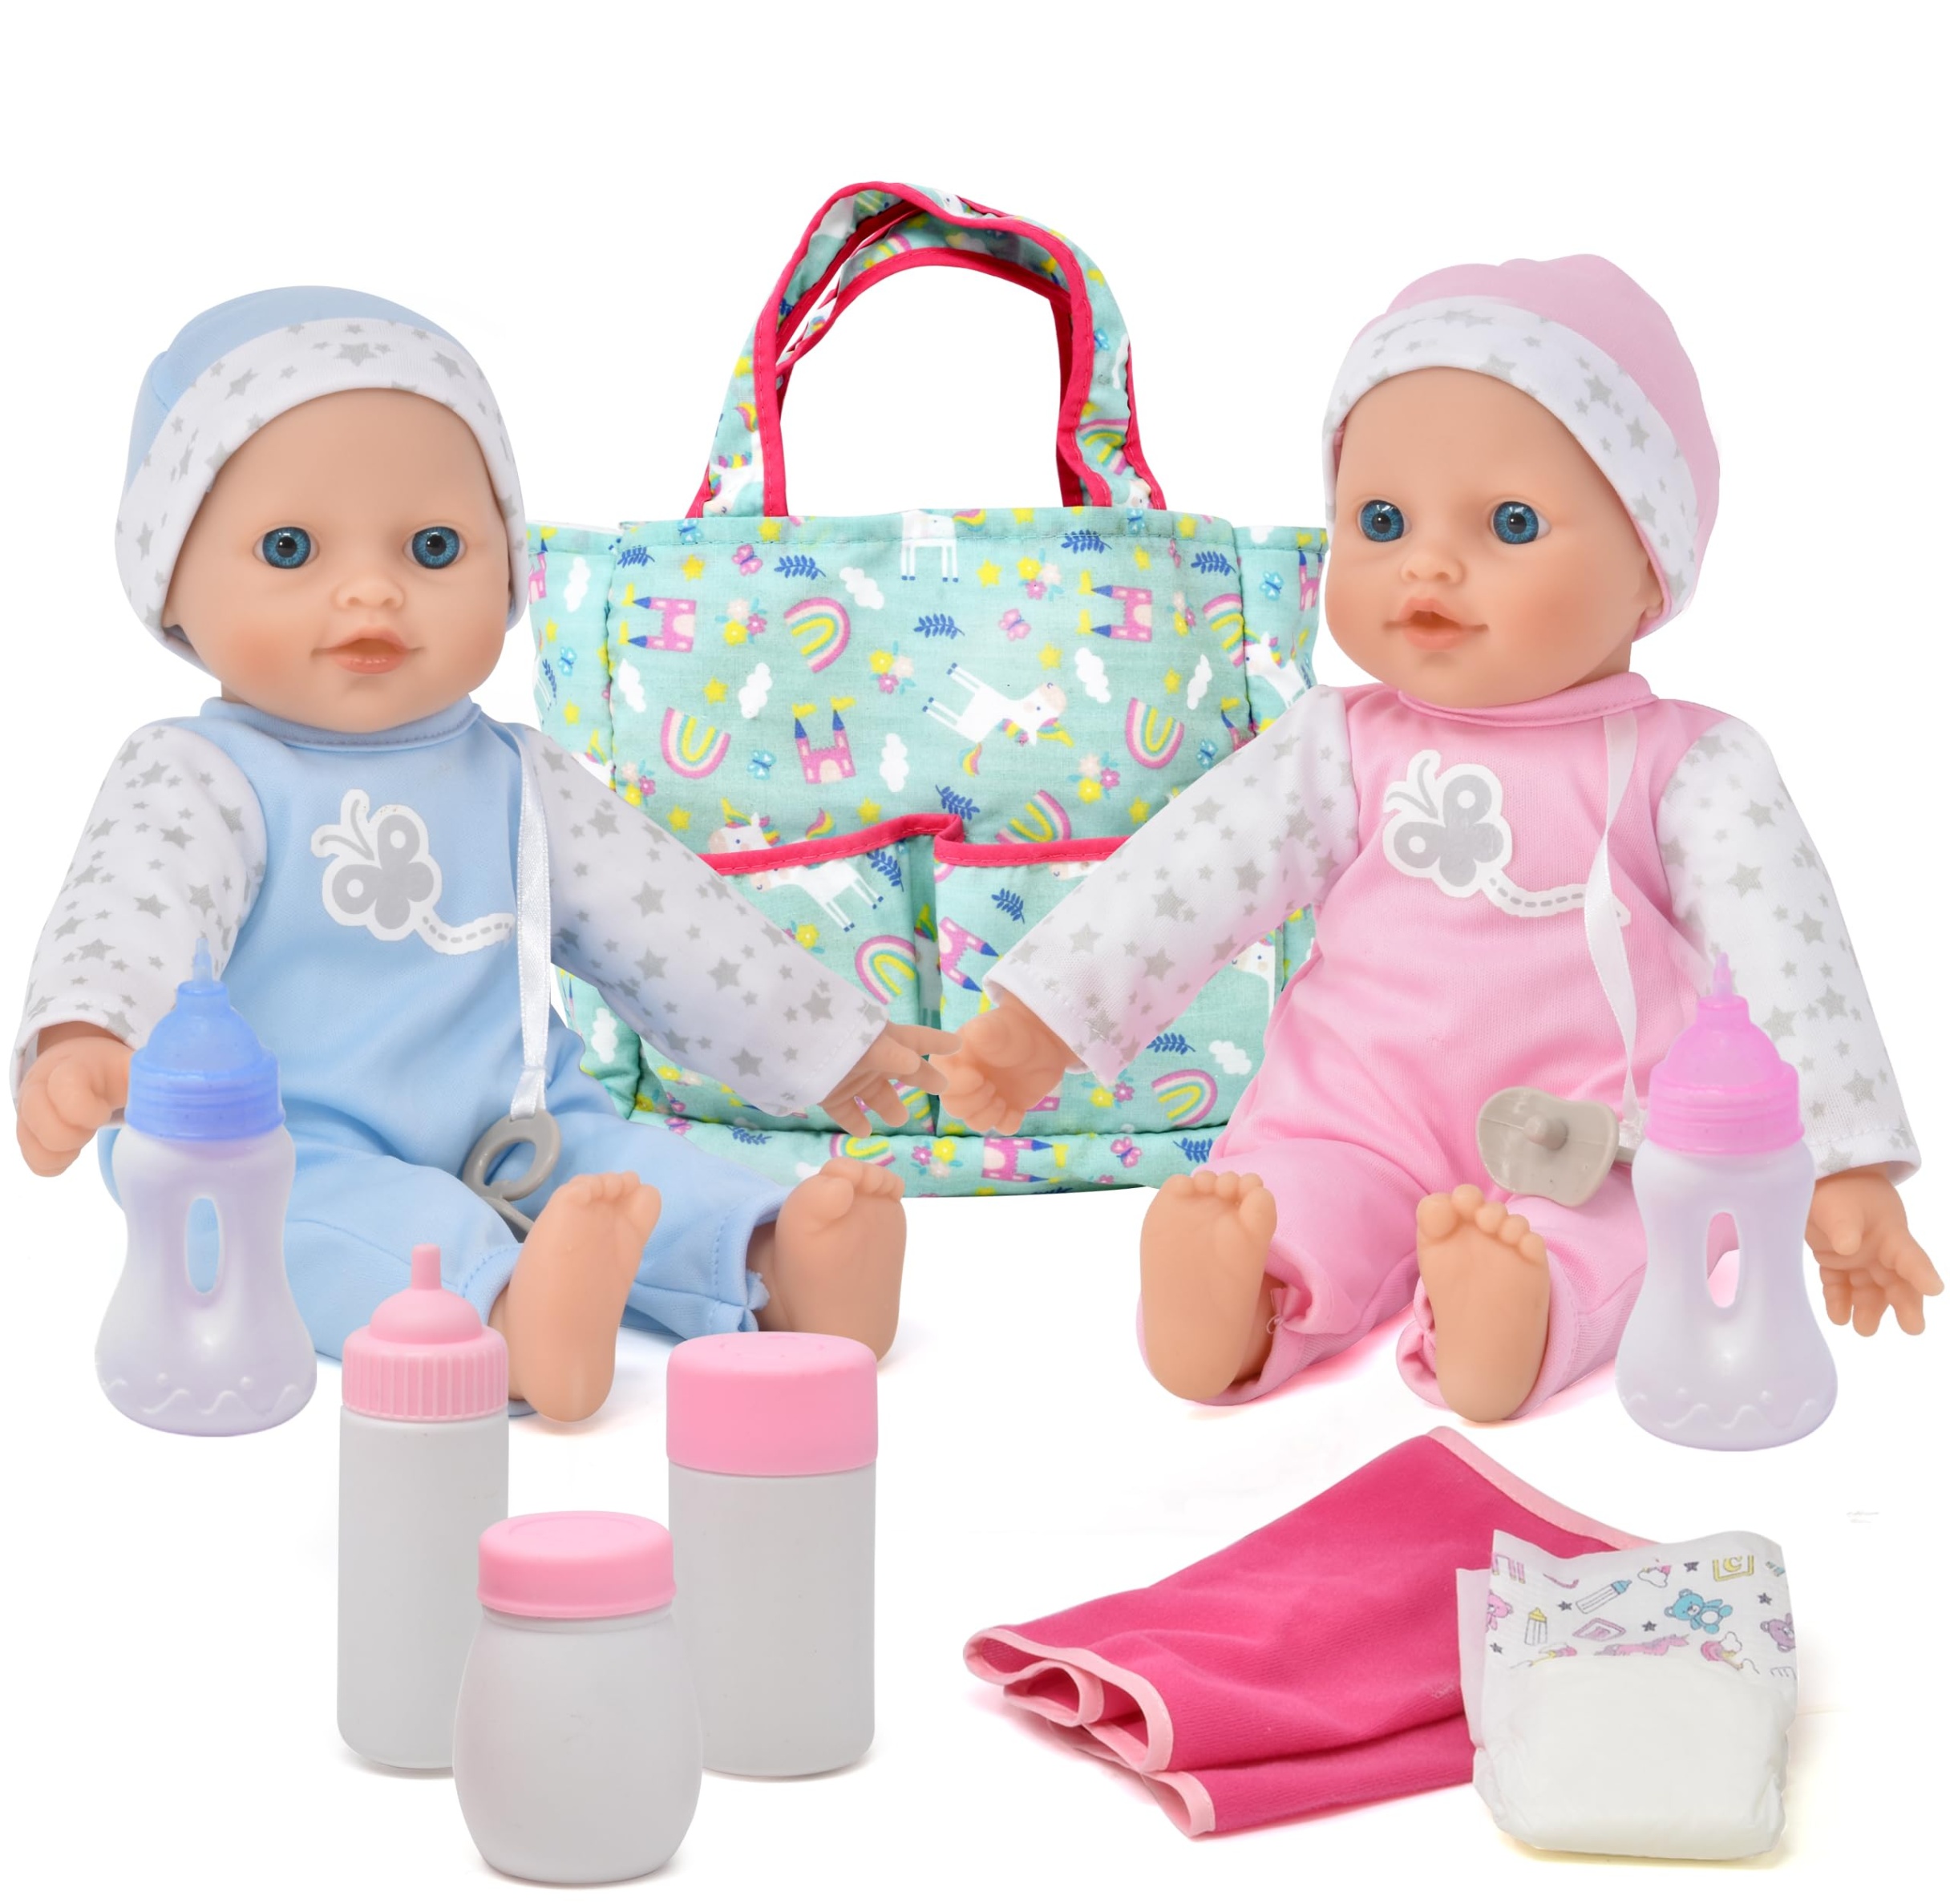 dolls and accessories Niche Utama Home Gift Boutique Twin Baby Dolls with Accessories, Soft Body Girl Doll & Baby  Boy Doll with Diaper Bag Doll Care Kit with Feeding Bottles, Pacifiers,